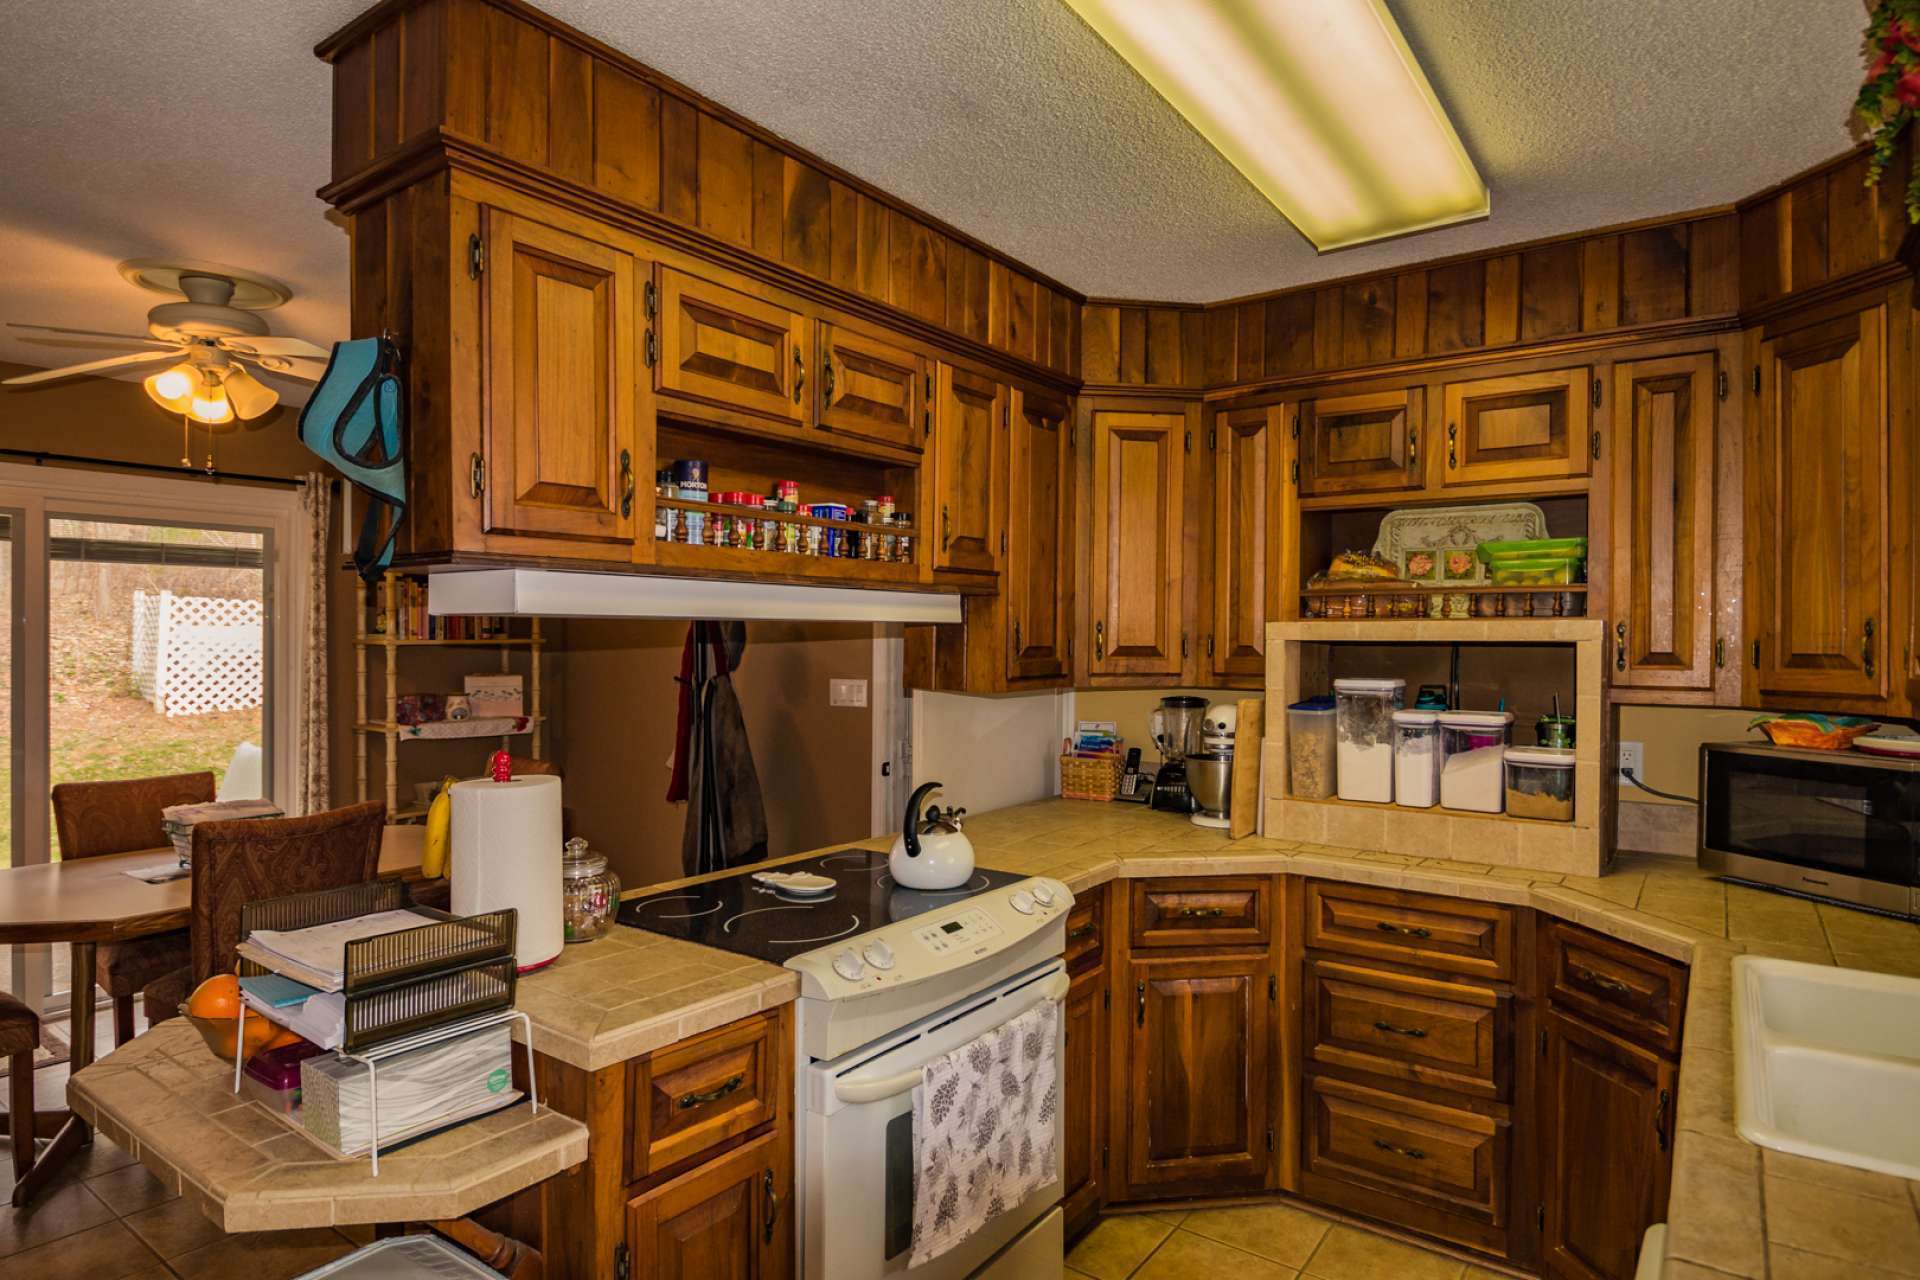 The galley style kitchen features walnut cabinets, ceramic tile flooring, newer appliances, and lots of work and storage space